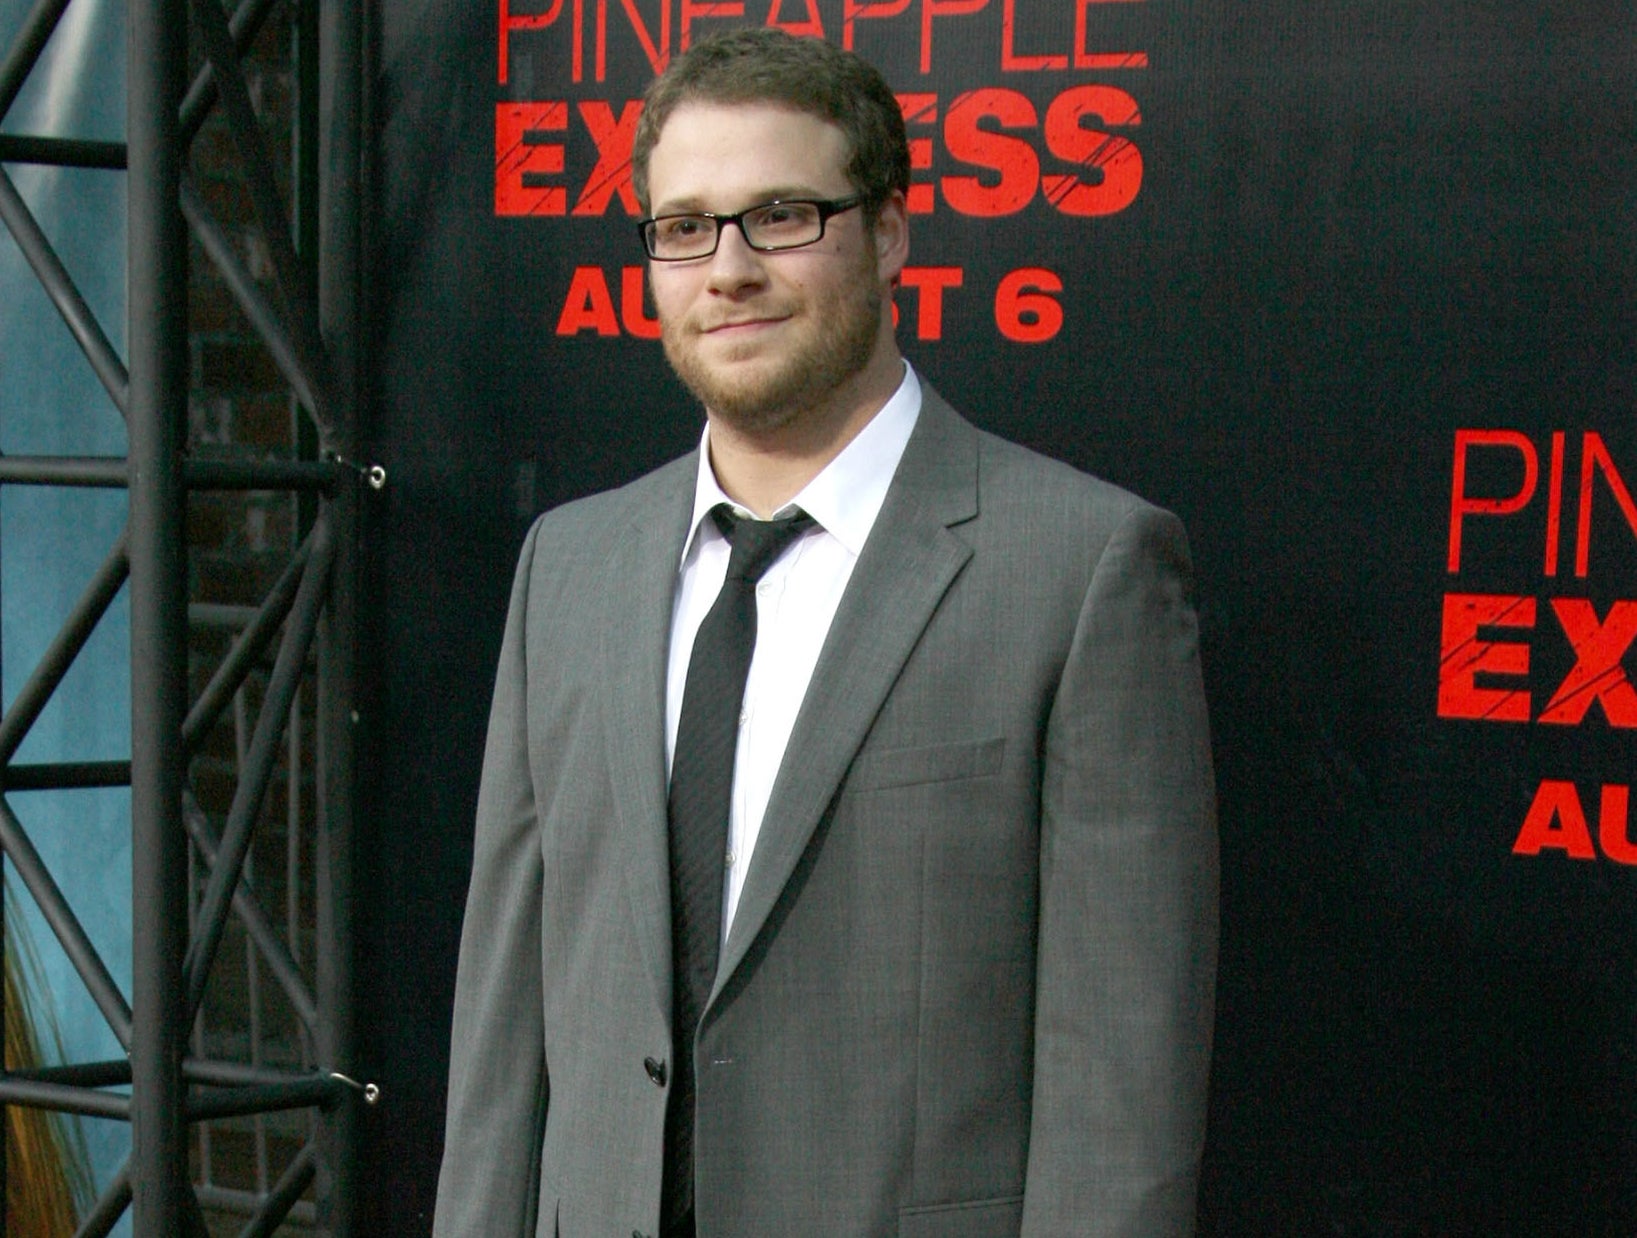 Seth attends the Pineapple Express premiere